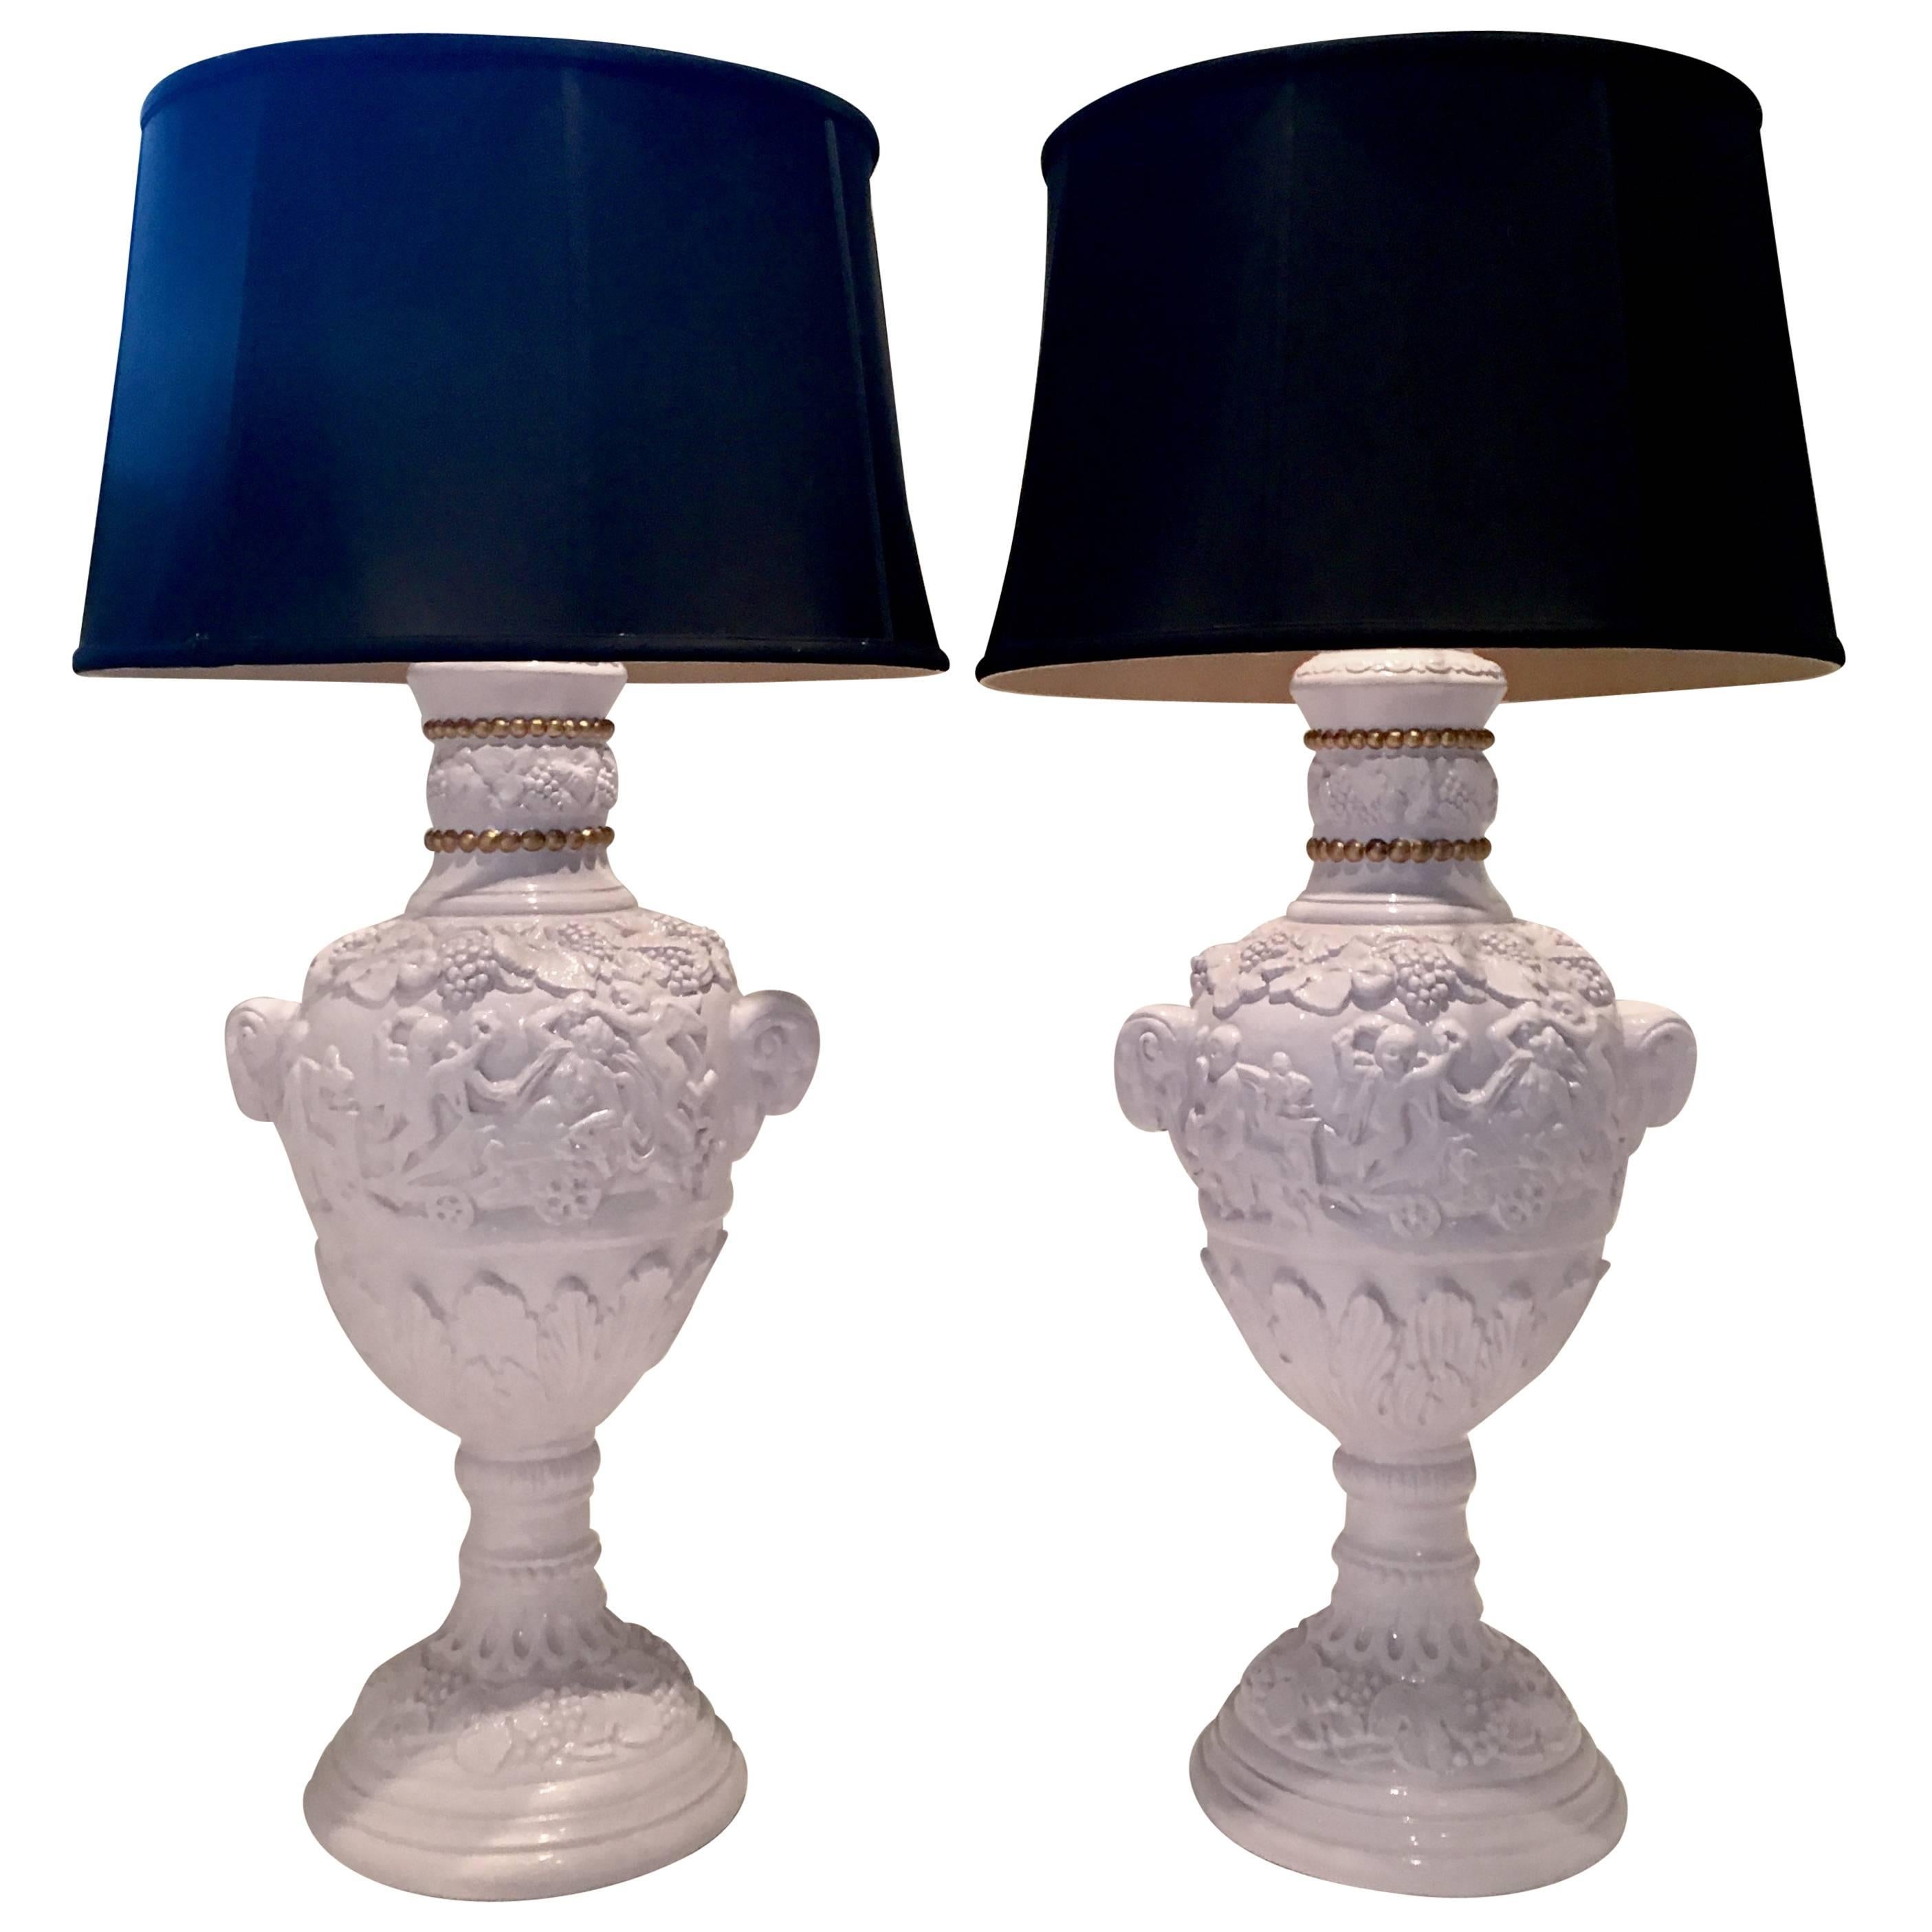 Pair of Neoclassical Lavender Lacquered Cherub and Rams Lamps